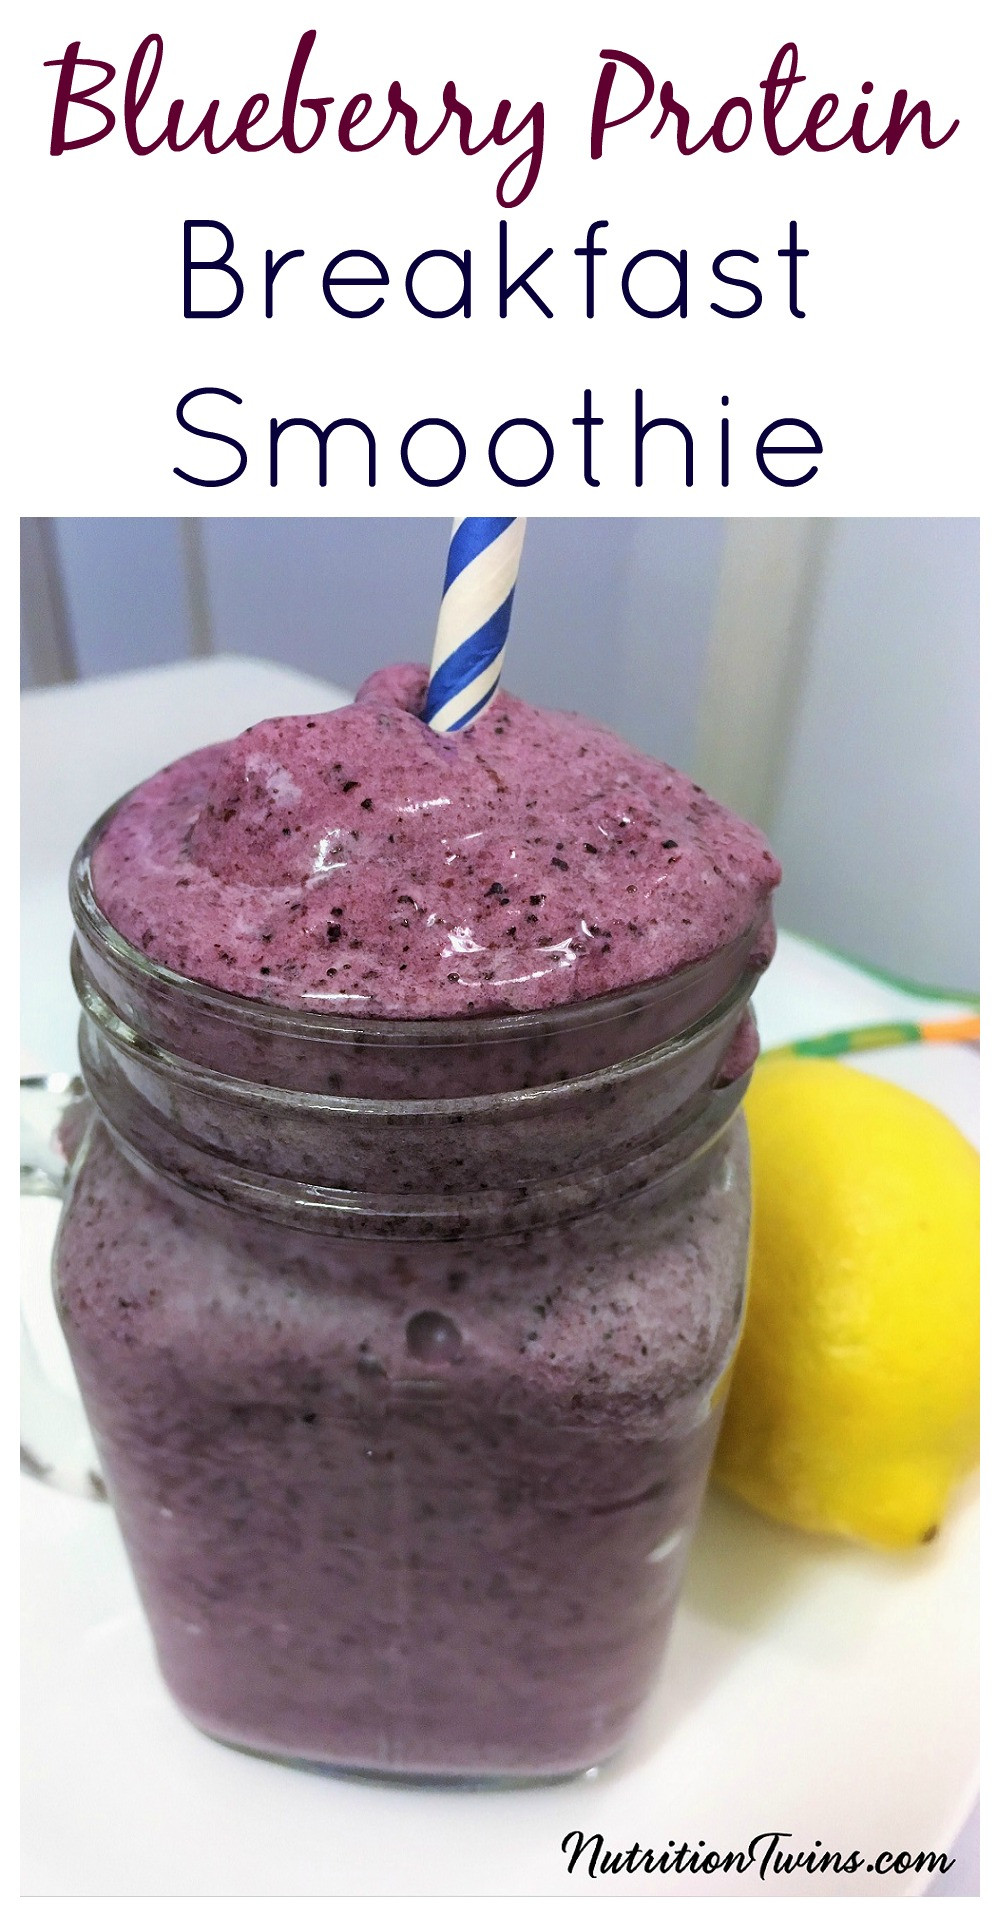 Healthy Breakfast Smoothies For Weight Loss
 Blueberry Protein Weight Loss Breakfast Smoothie